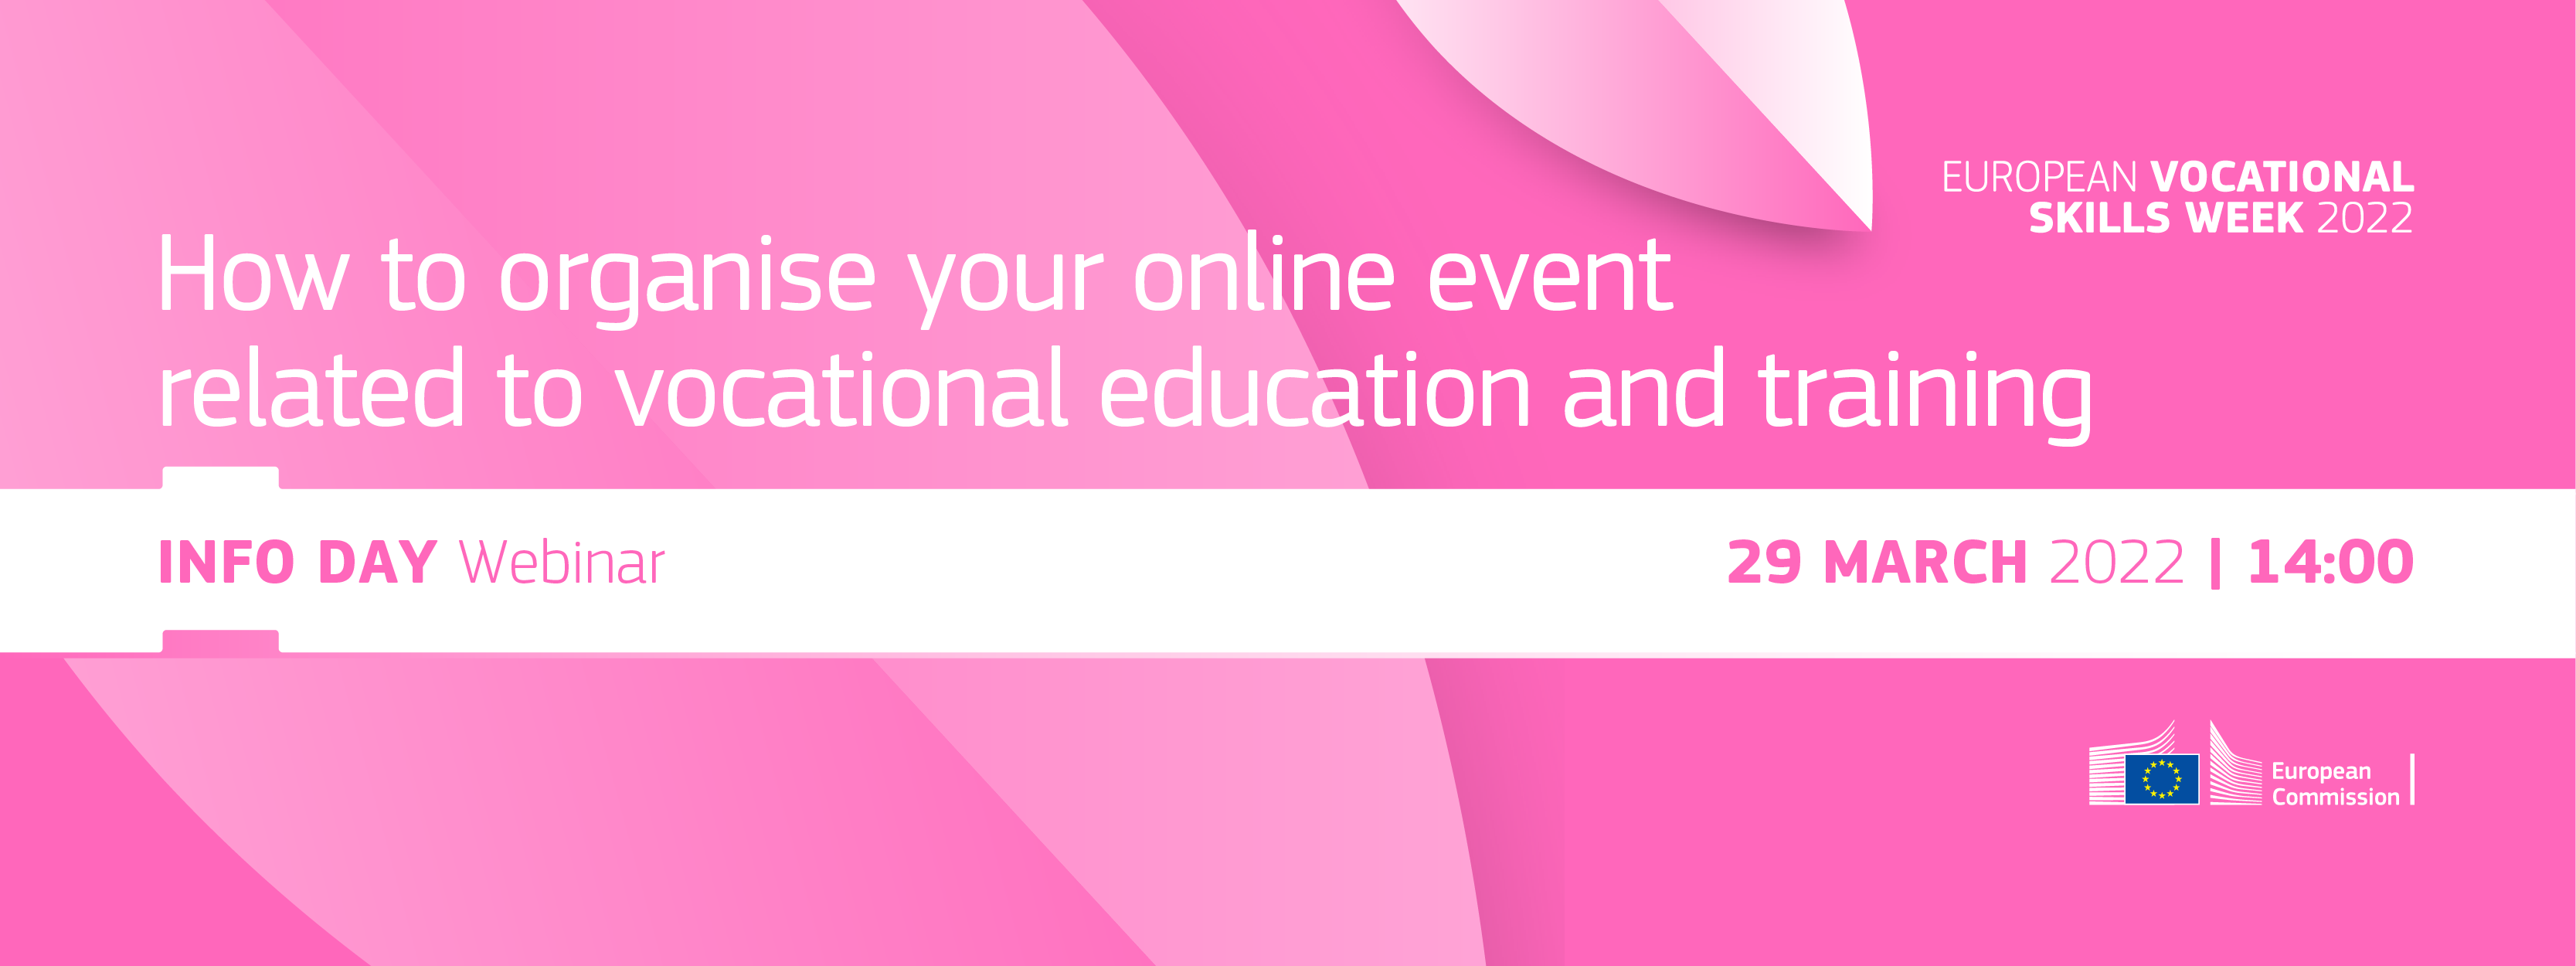 EVSW 2022 - Webinar: How to organise your online event related to vocational education and training